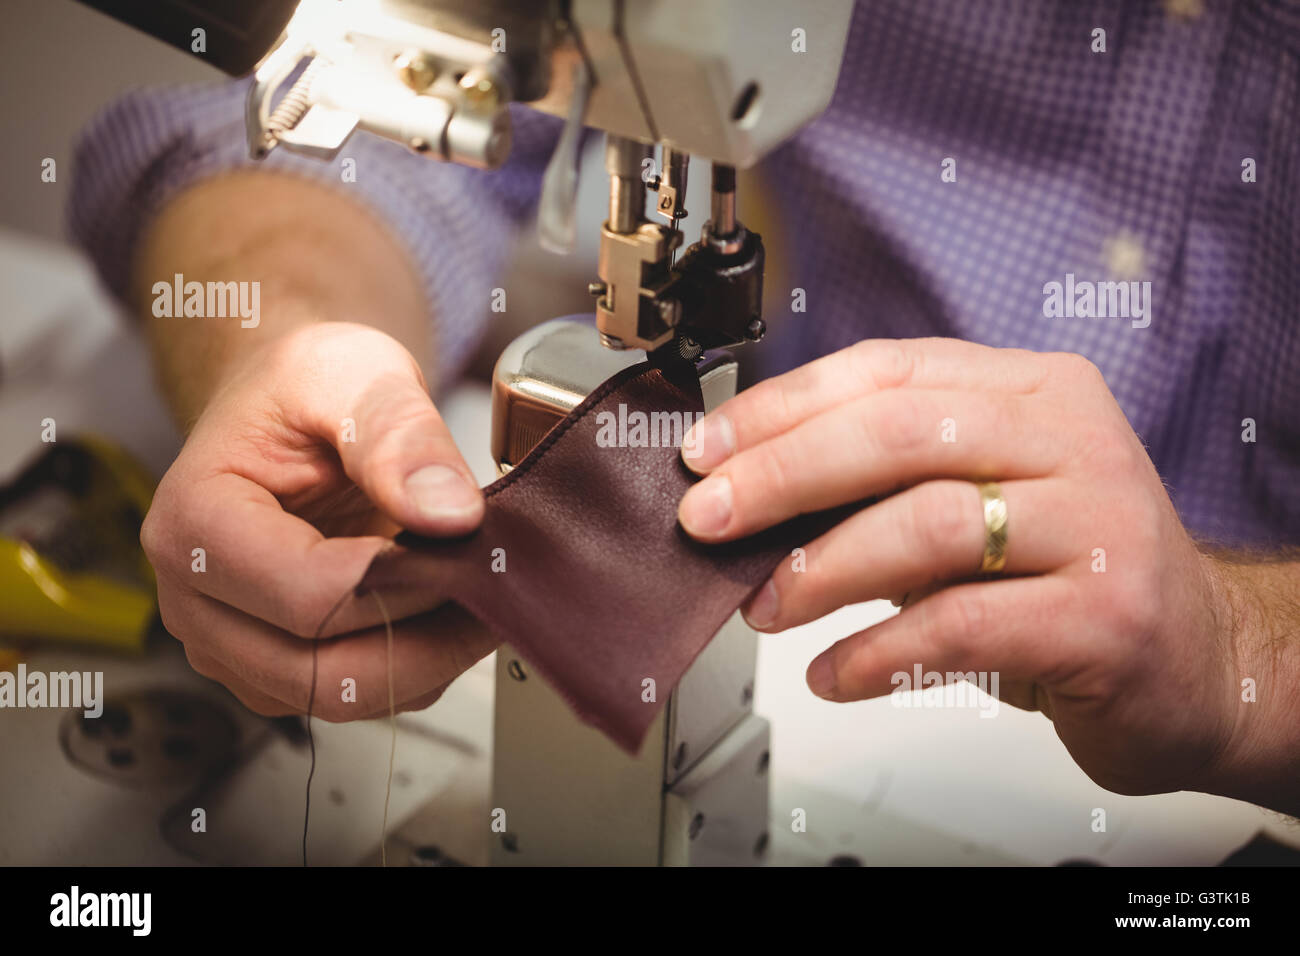 Close up of hands sewing a piece of leather Stock Photo